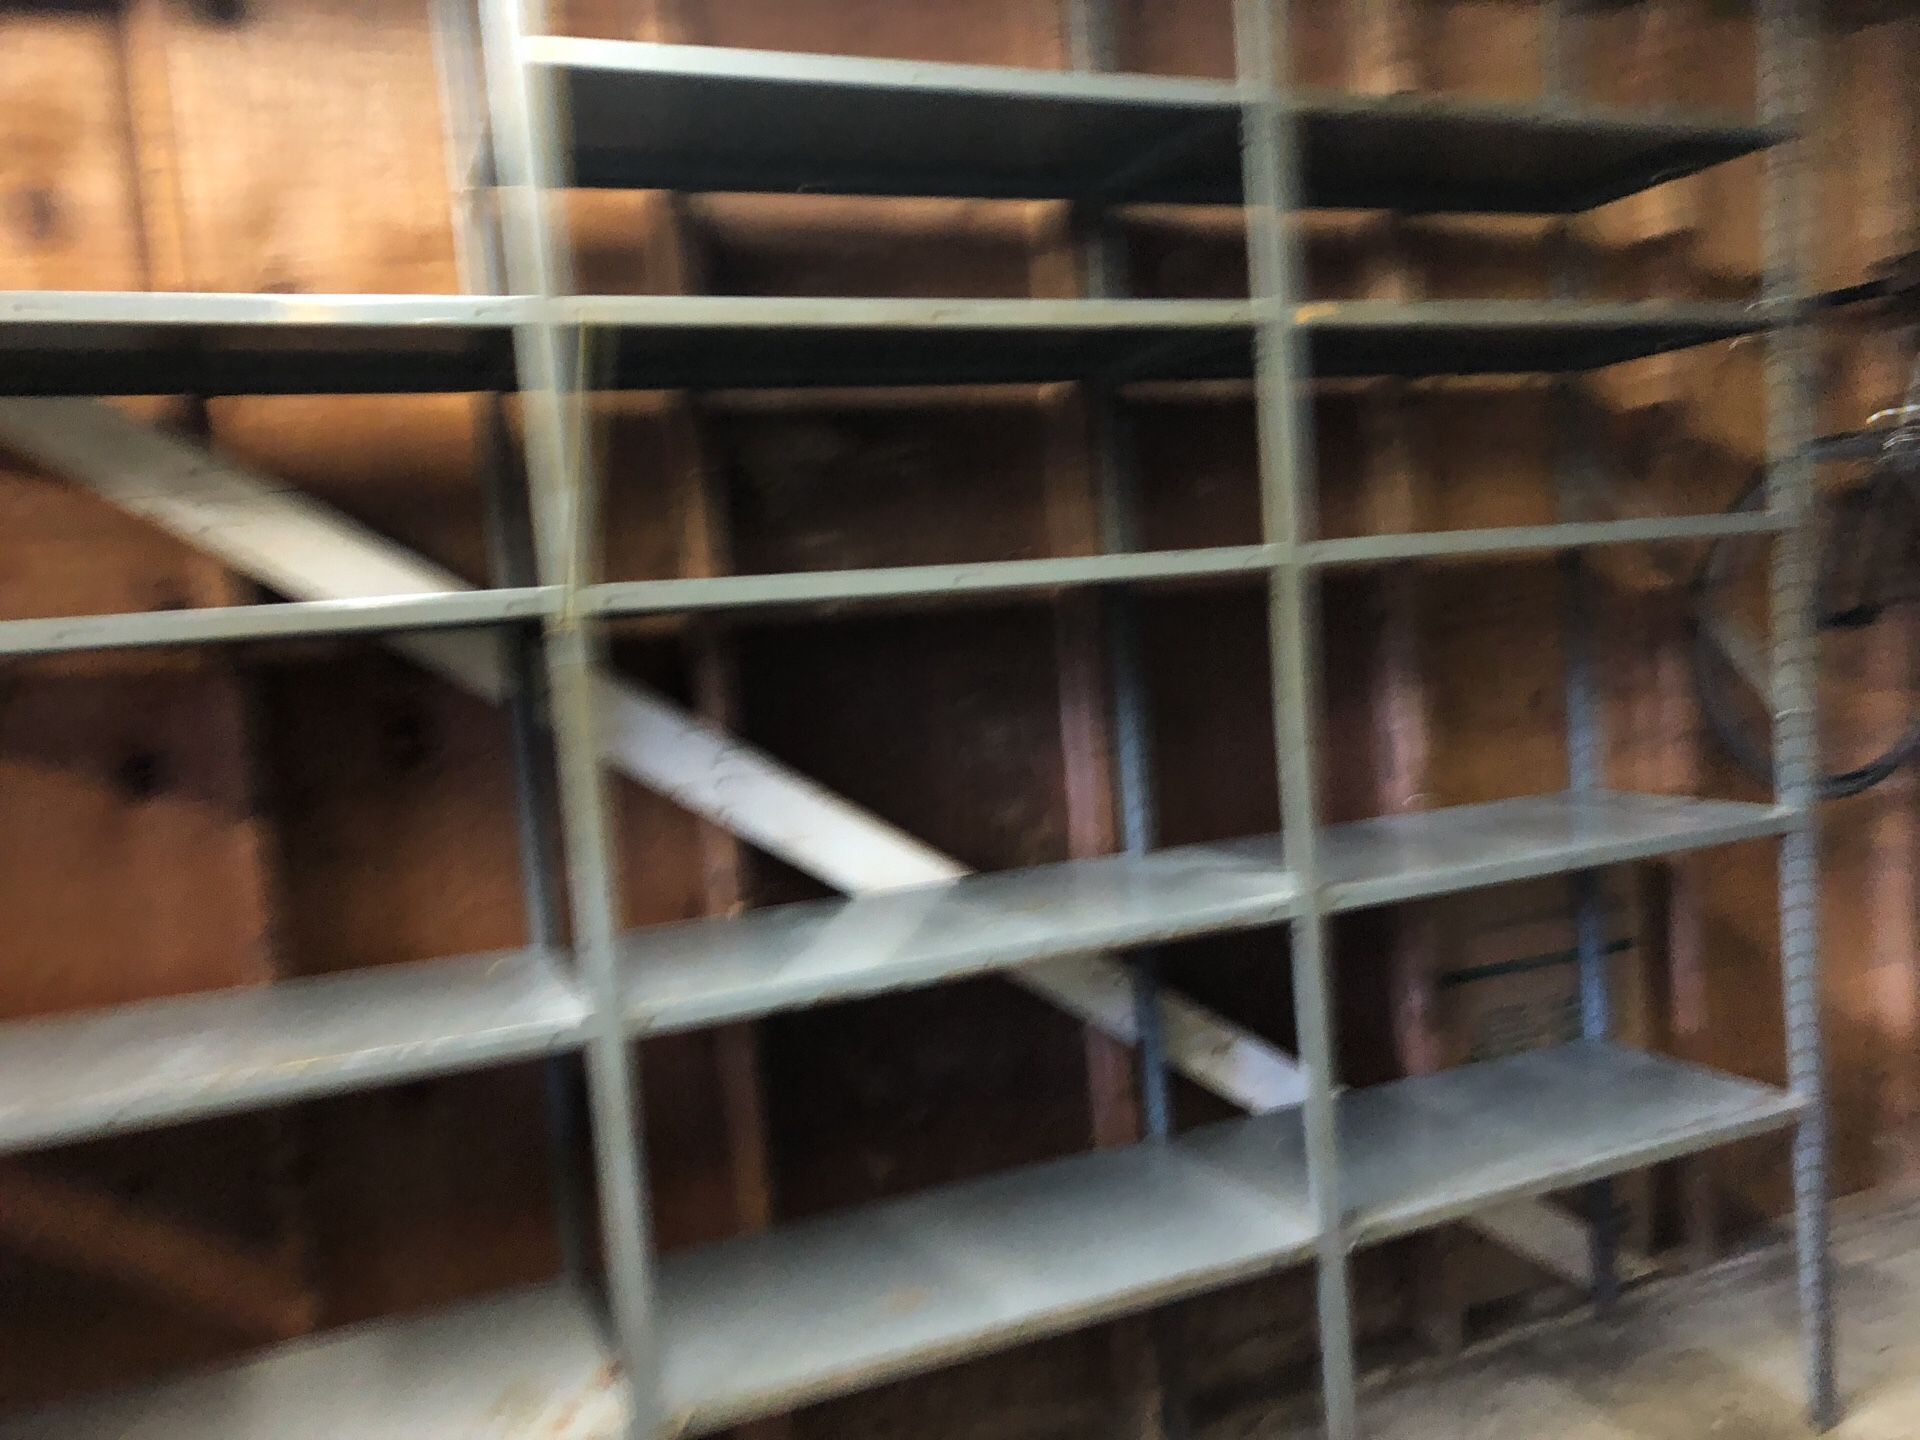 8ft grey tall, 9 ft wide galvanized steel shelves for sale $125 OBO Scrapping 10/8/18 — Must sell today and pickup today